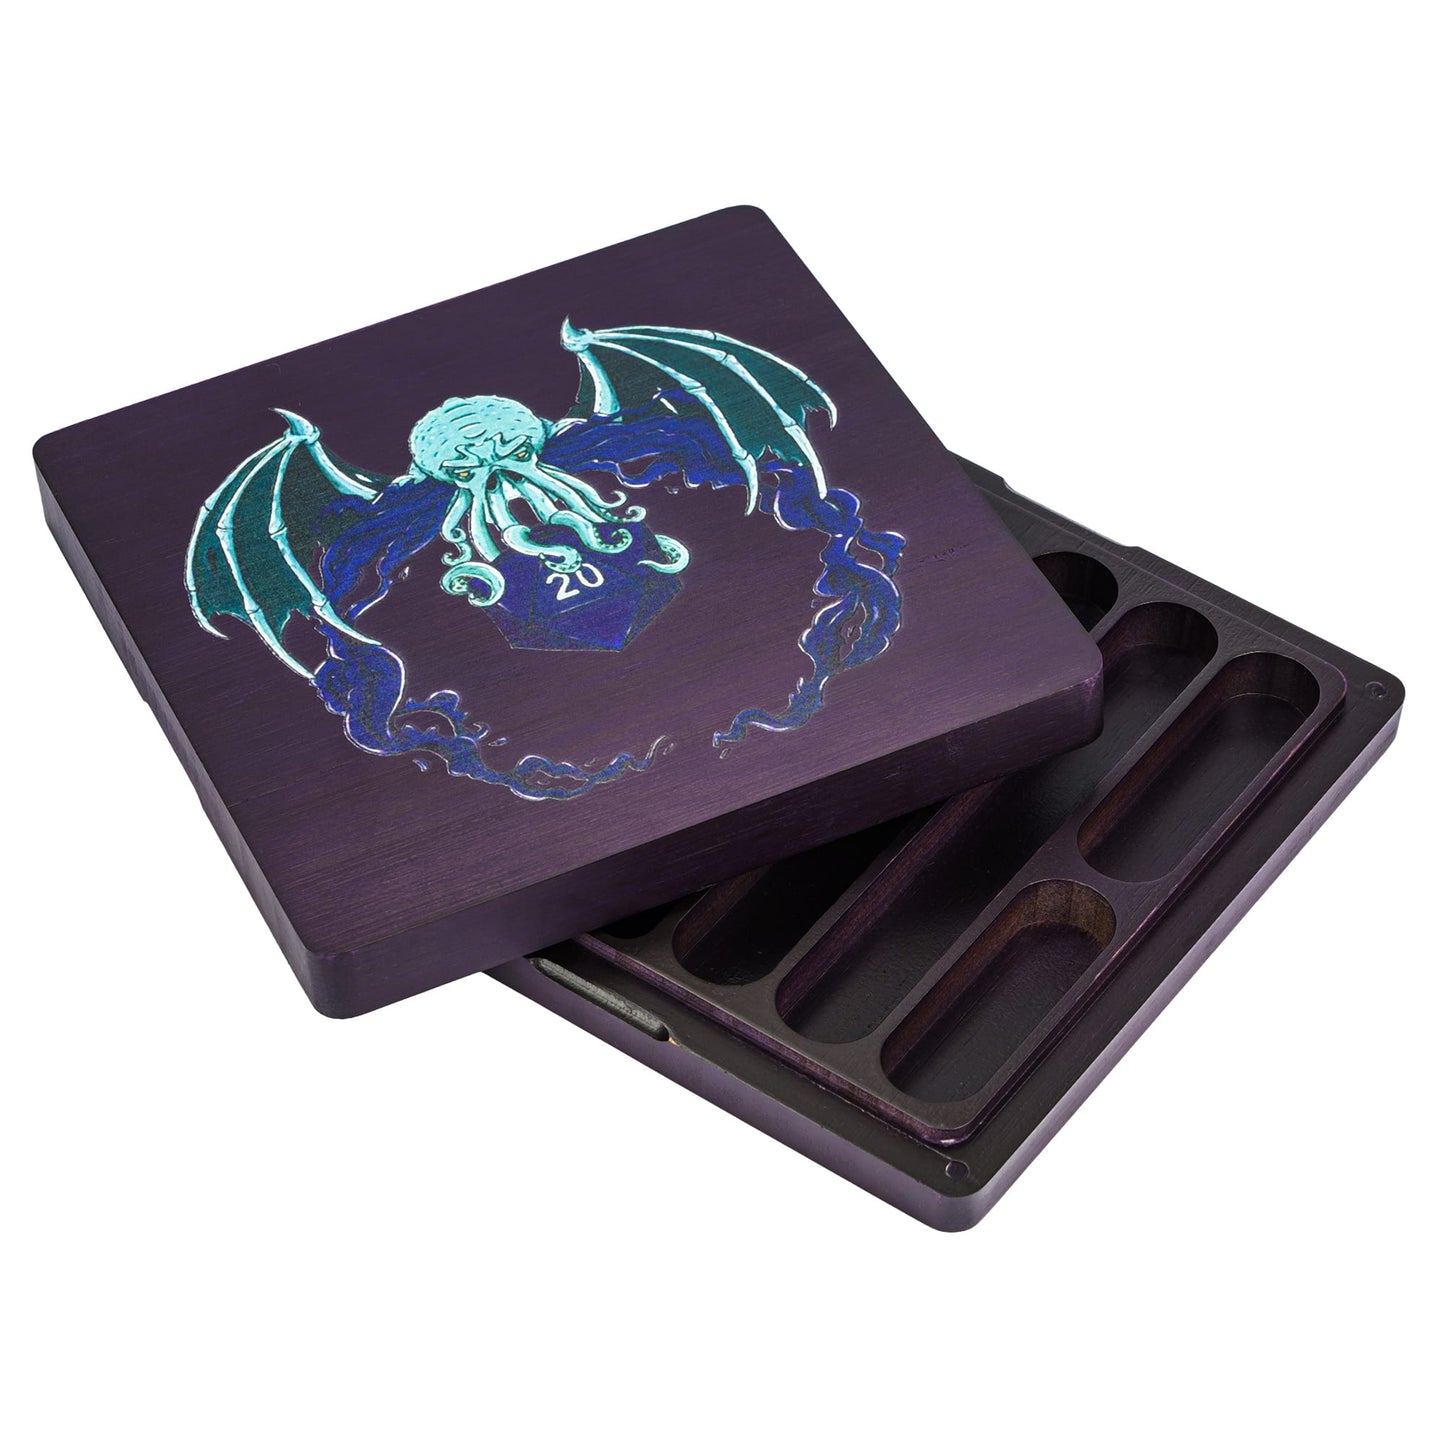 Eldritch Abyss - Dice Tray & Case